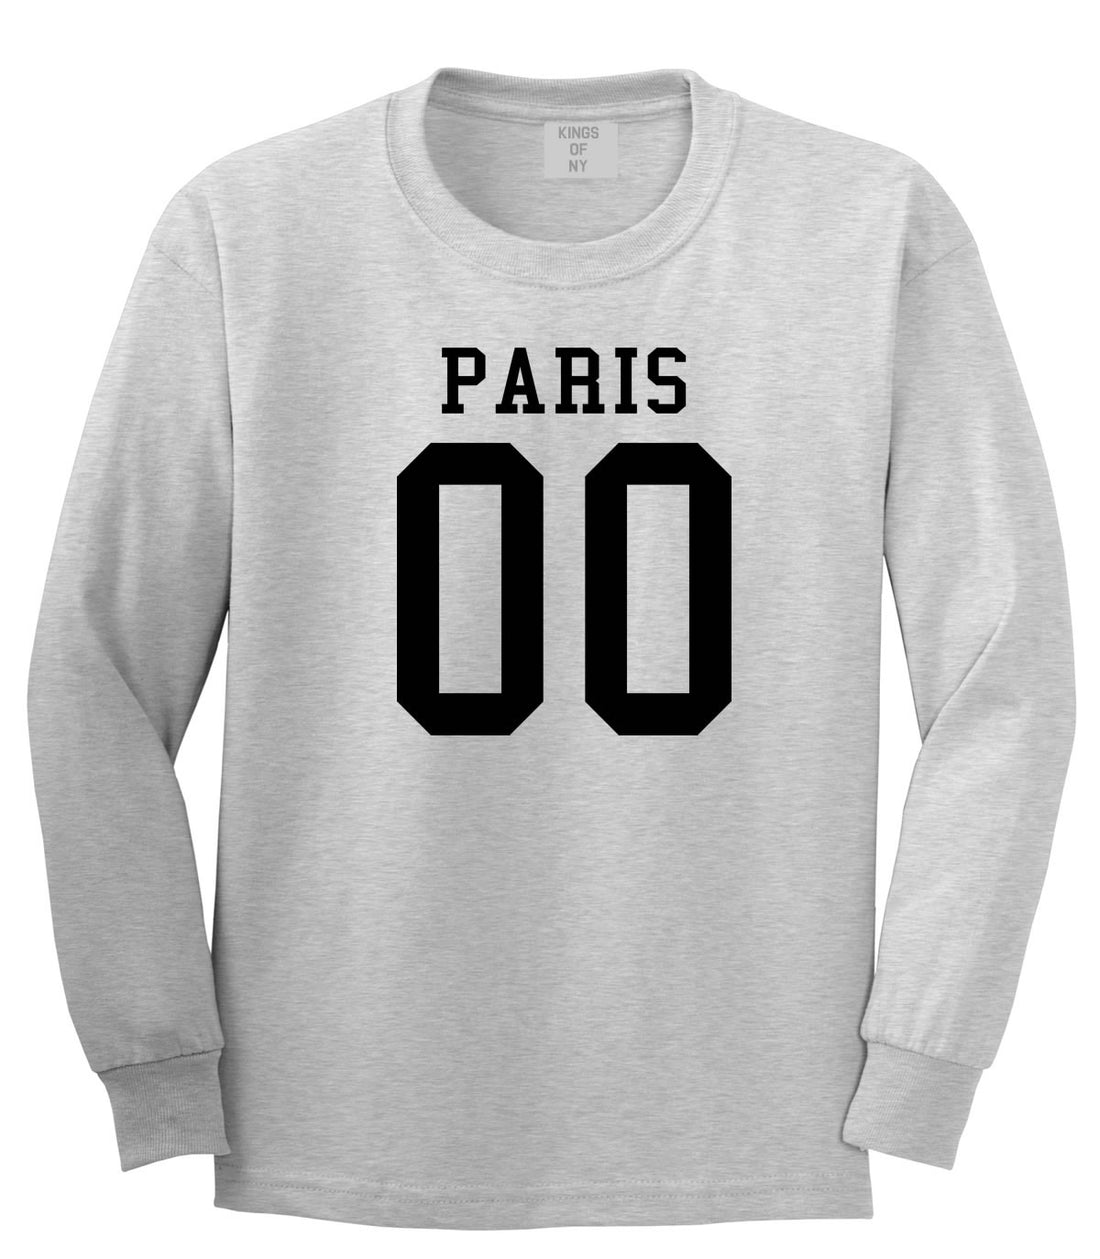 Paris Team 00 Jersey Long Sleeve T-Shirt in Grey By Kings Of NY